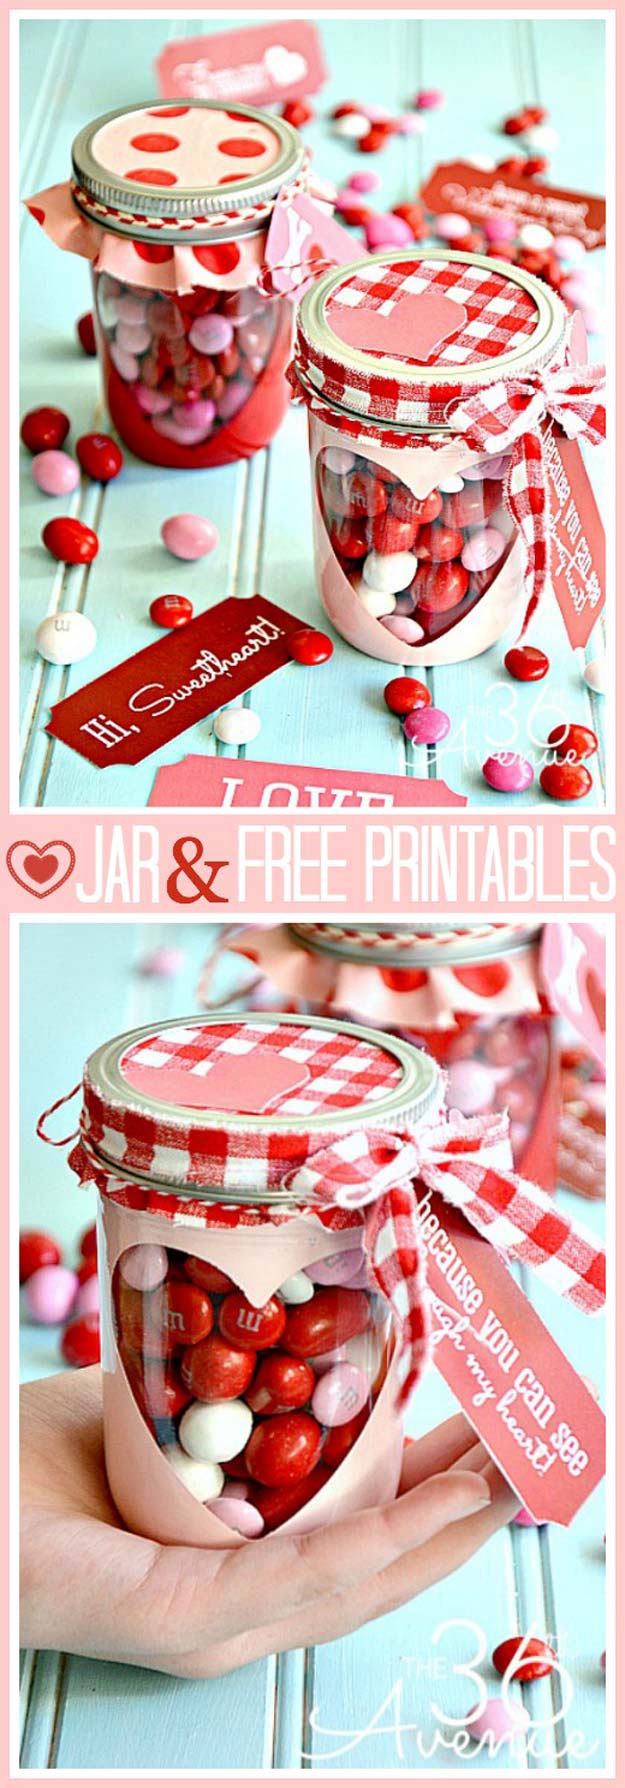 Best Mason Jar Valentine Crafts - Free Valentine Printable And Heart Candy Jar - Cute Mason Jar Valentines Day Gifts and Crafts | Easy DIY Ideas for Valentines Day for Homemade Gift Giving and Room Decor | Creative Home Decor and Craft Projects for Teens, Teenagers, Kids and Adults 